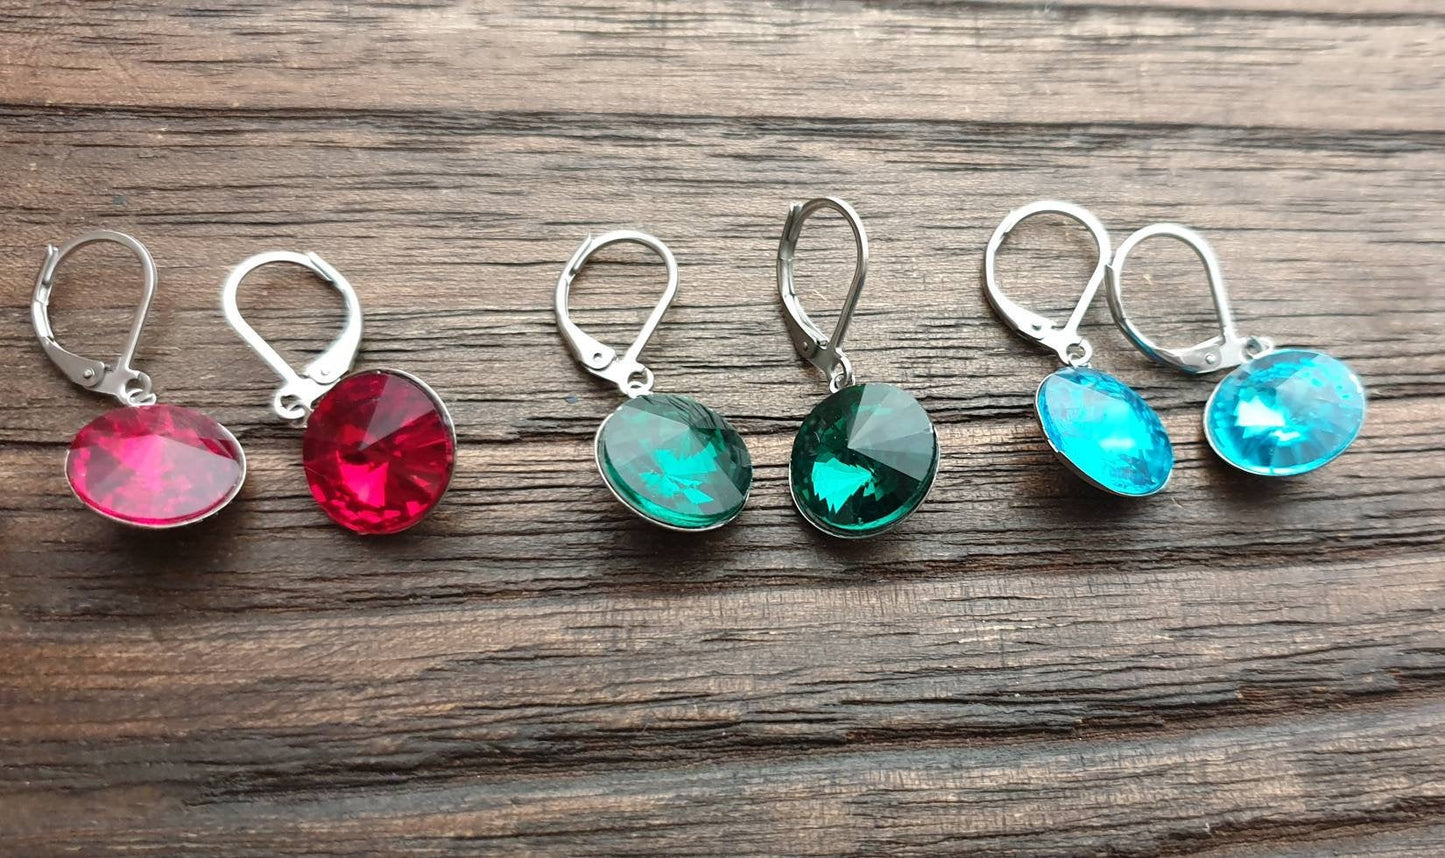 Glass Crystal Leverback Earrings Stainless Steel. Choose colour: Clear, Black Diamond, Emerald Green, Aquamarine, Red 12mm